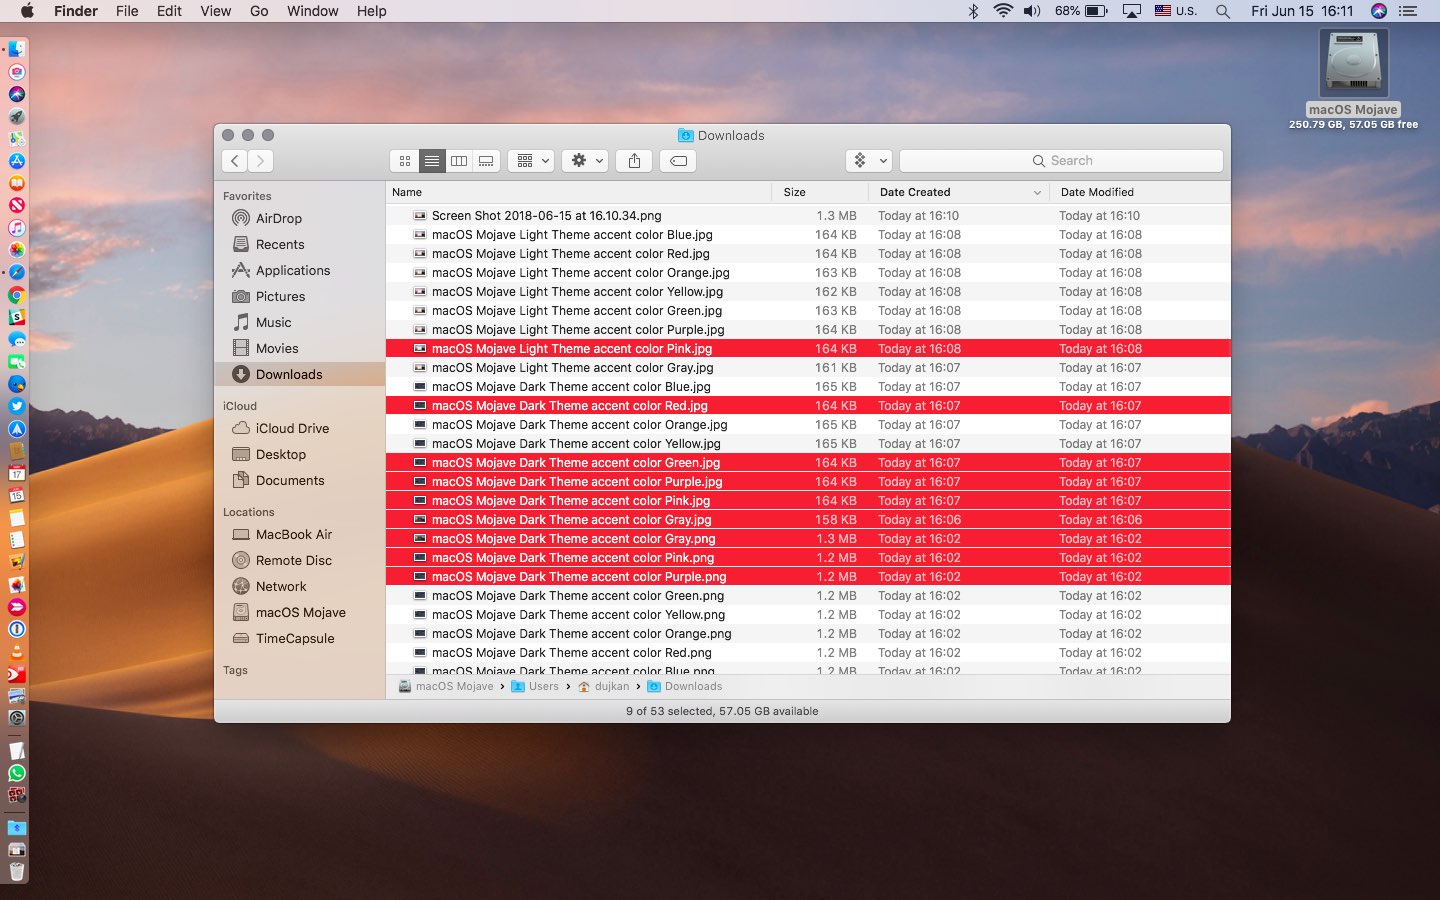 The Finder showing a non-adjacent file selection in the red highlights color